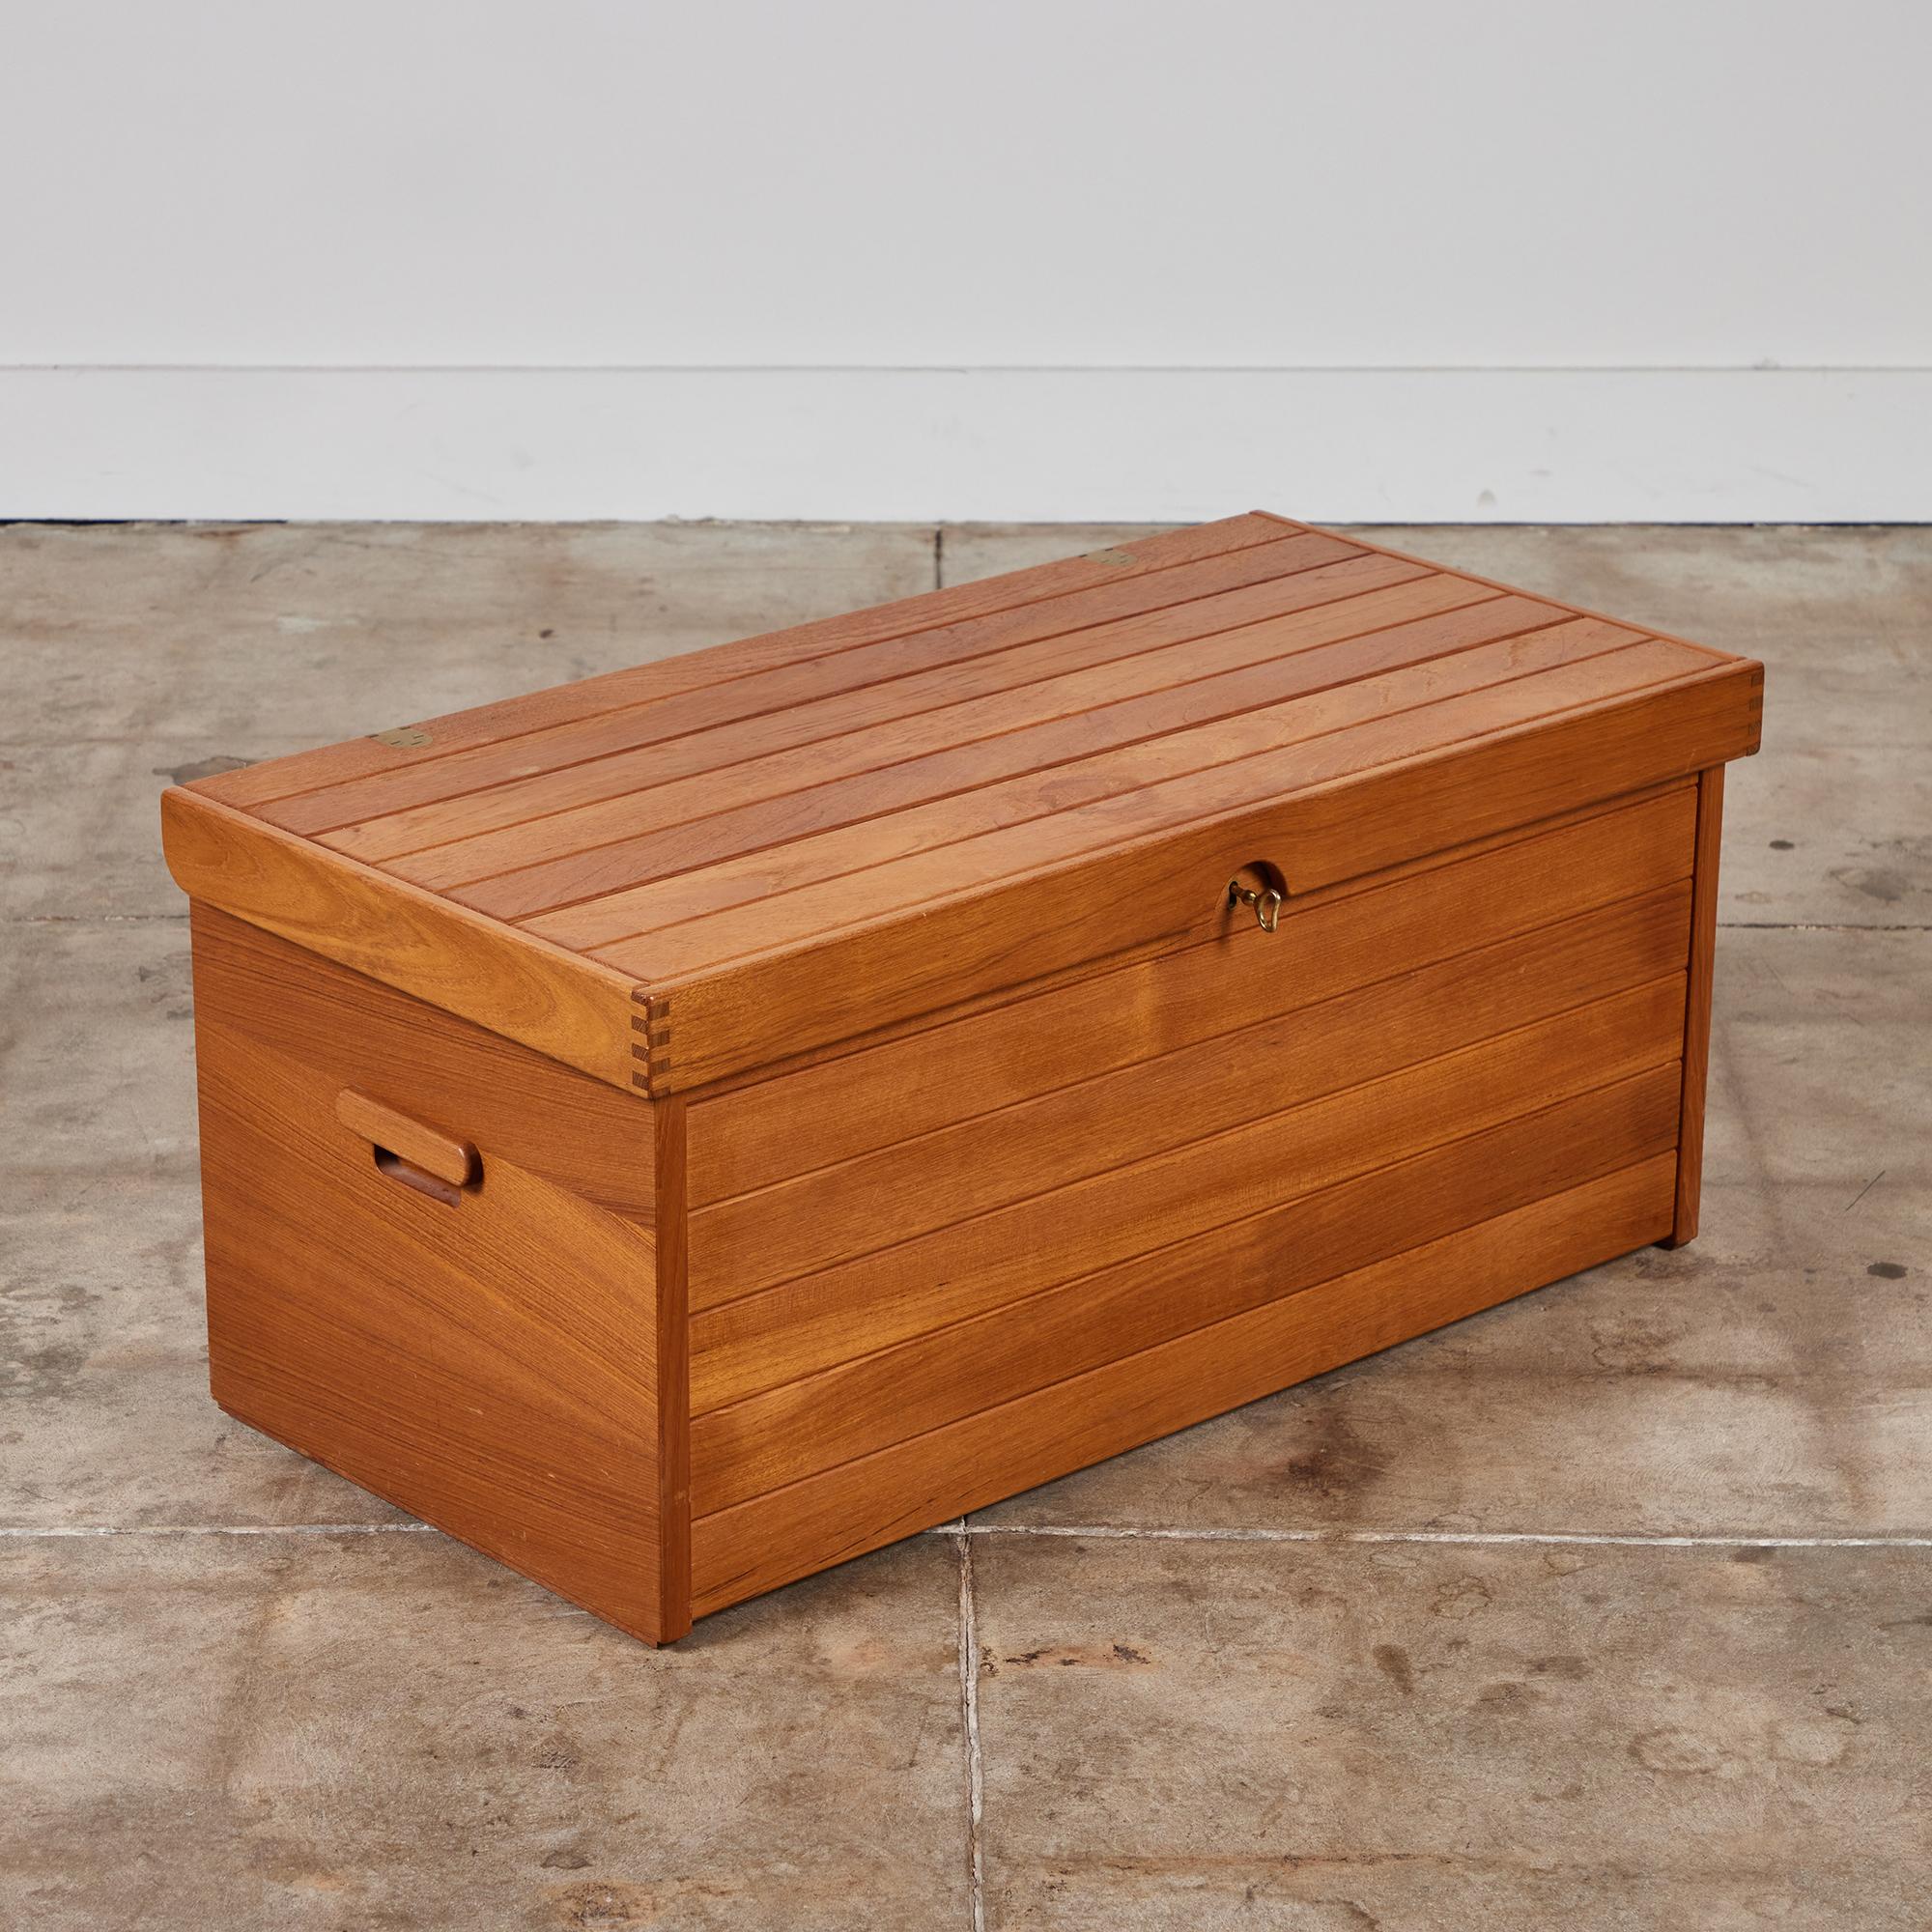 Storage trunk by Kai Kristiansen for Aksel Kjersgaard, c.1960s, Denmark. The teak chest features a brass hinged lid and brass lock with key. The inside of the chest showcases a large open cavity for storage and a small tray that rests along the top